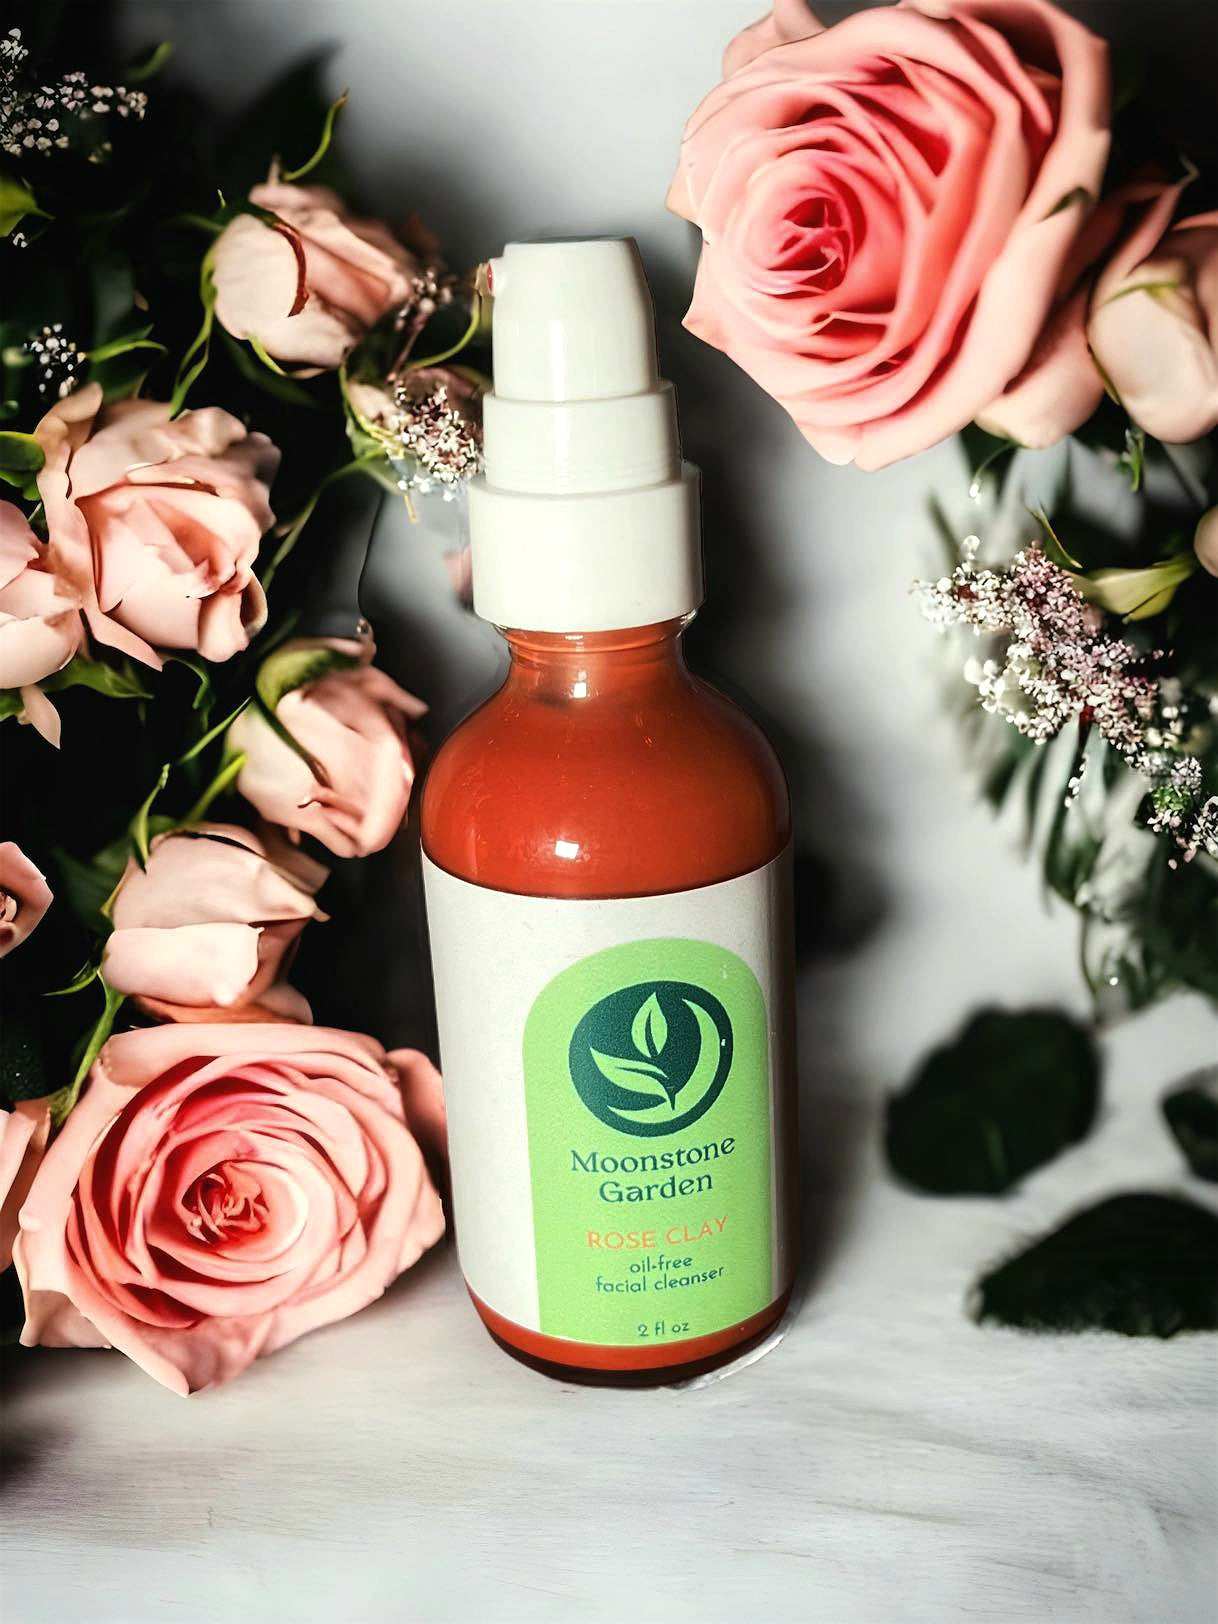 Rose Clay oil-free facial cleanser